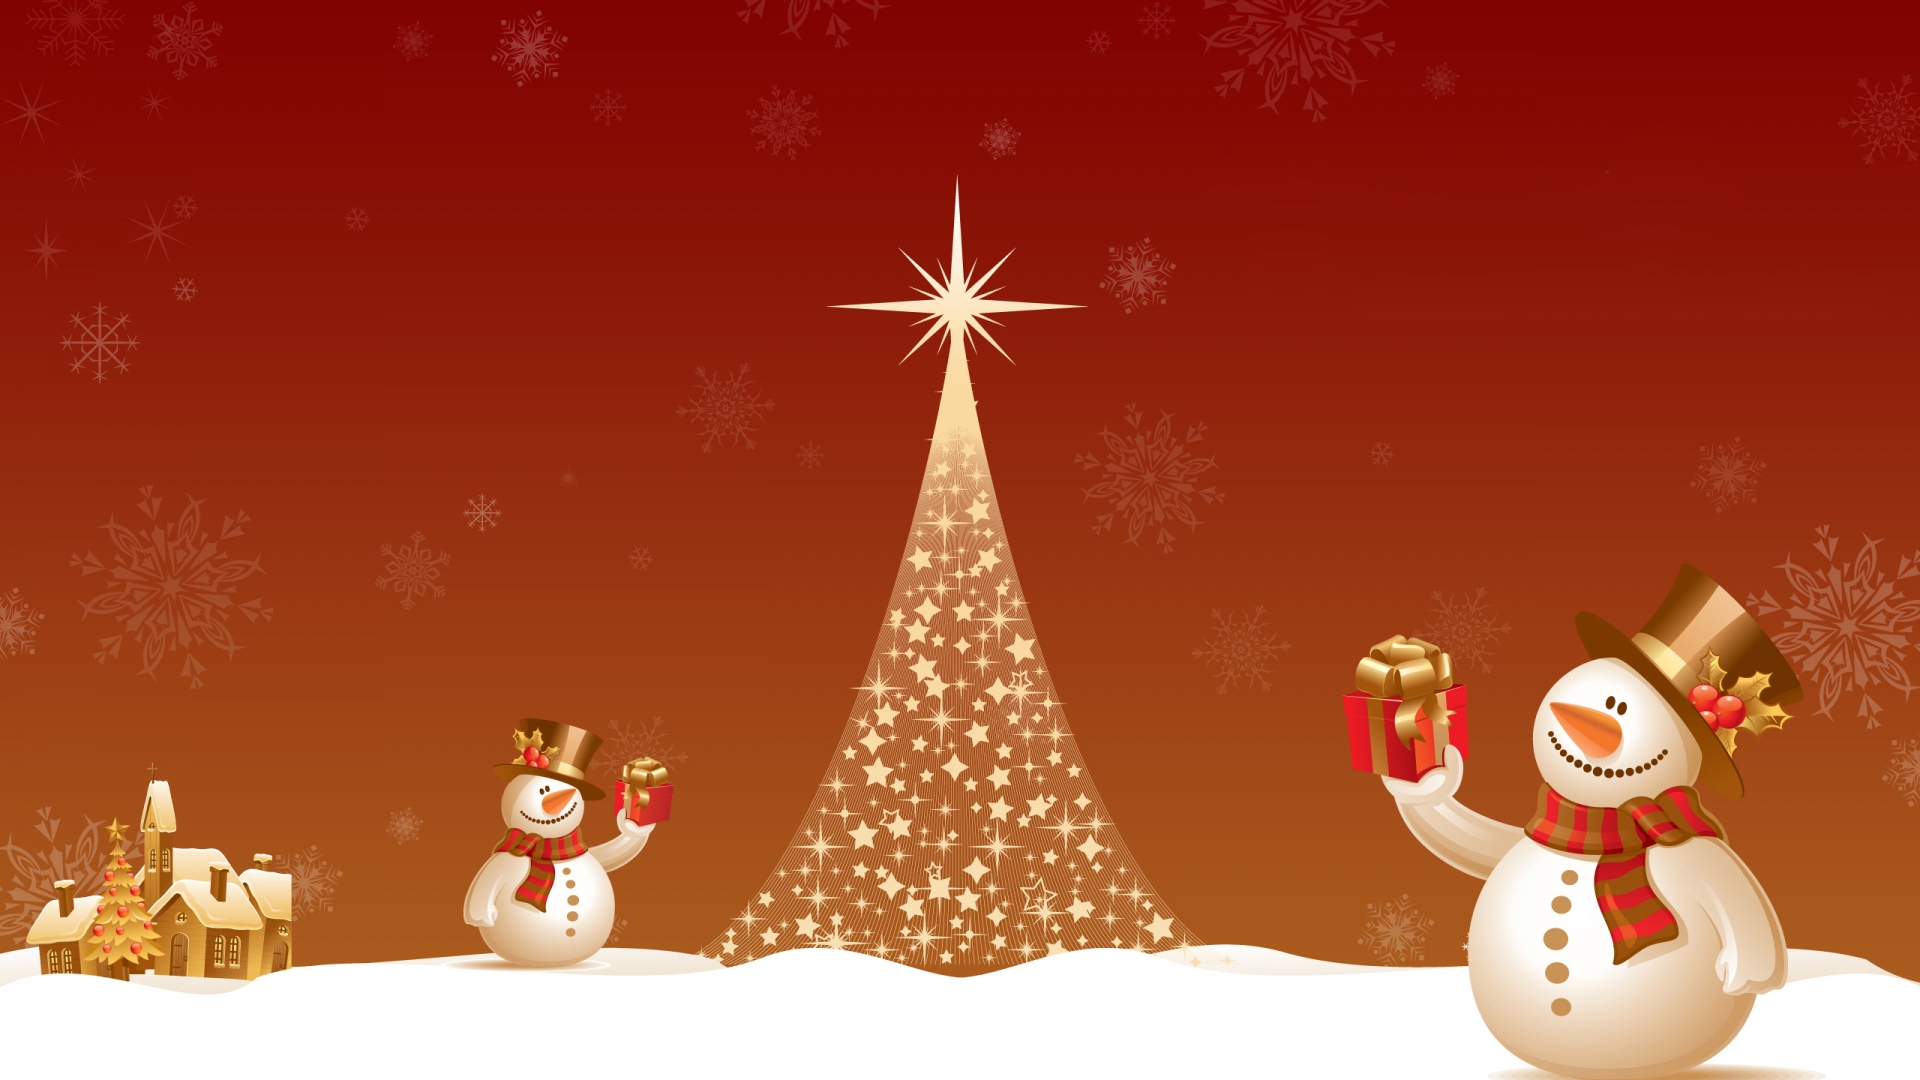 Snowman Close to Christmas Tree for 1920 x 1080 HDTV 1080p resolution